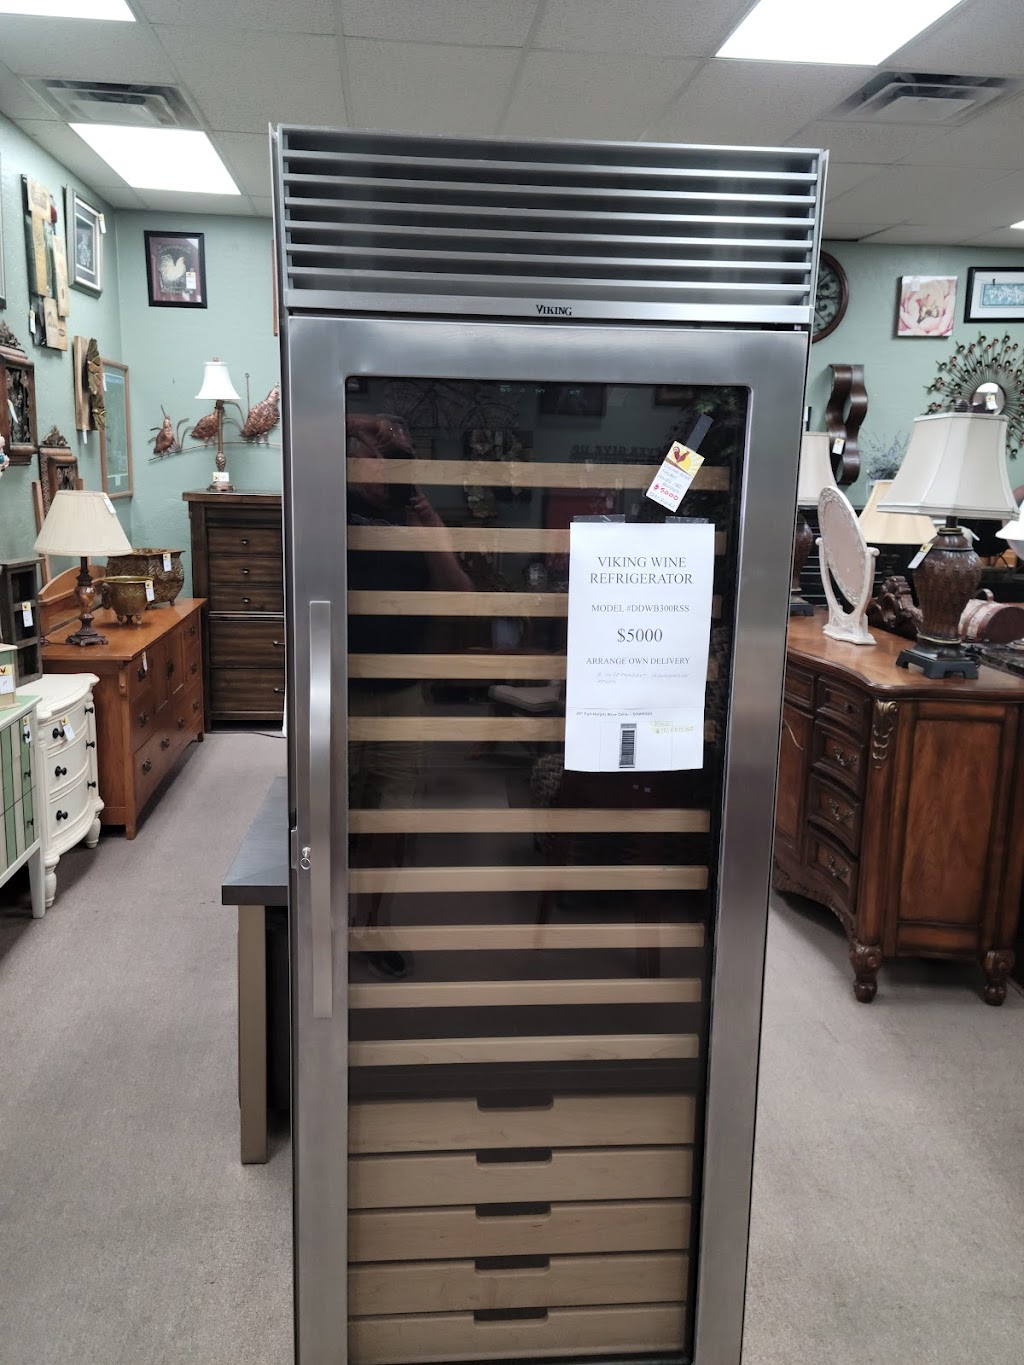 Red Rooster Consignment Furniture | Photo 4 of 10 | Address: 5959 E Southern Ave, Mesa, AZ 85206, USA | Phone: (480) 832-9404